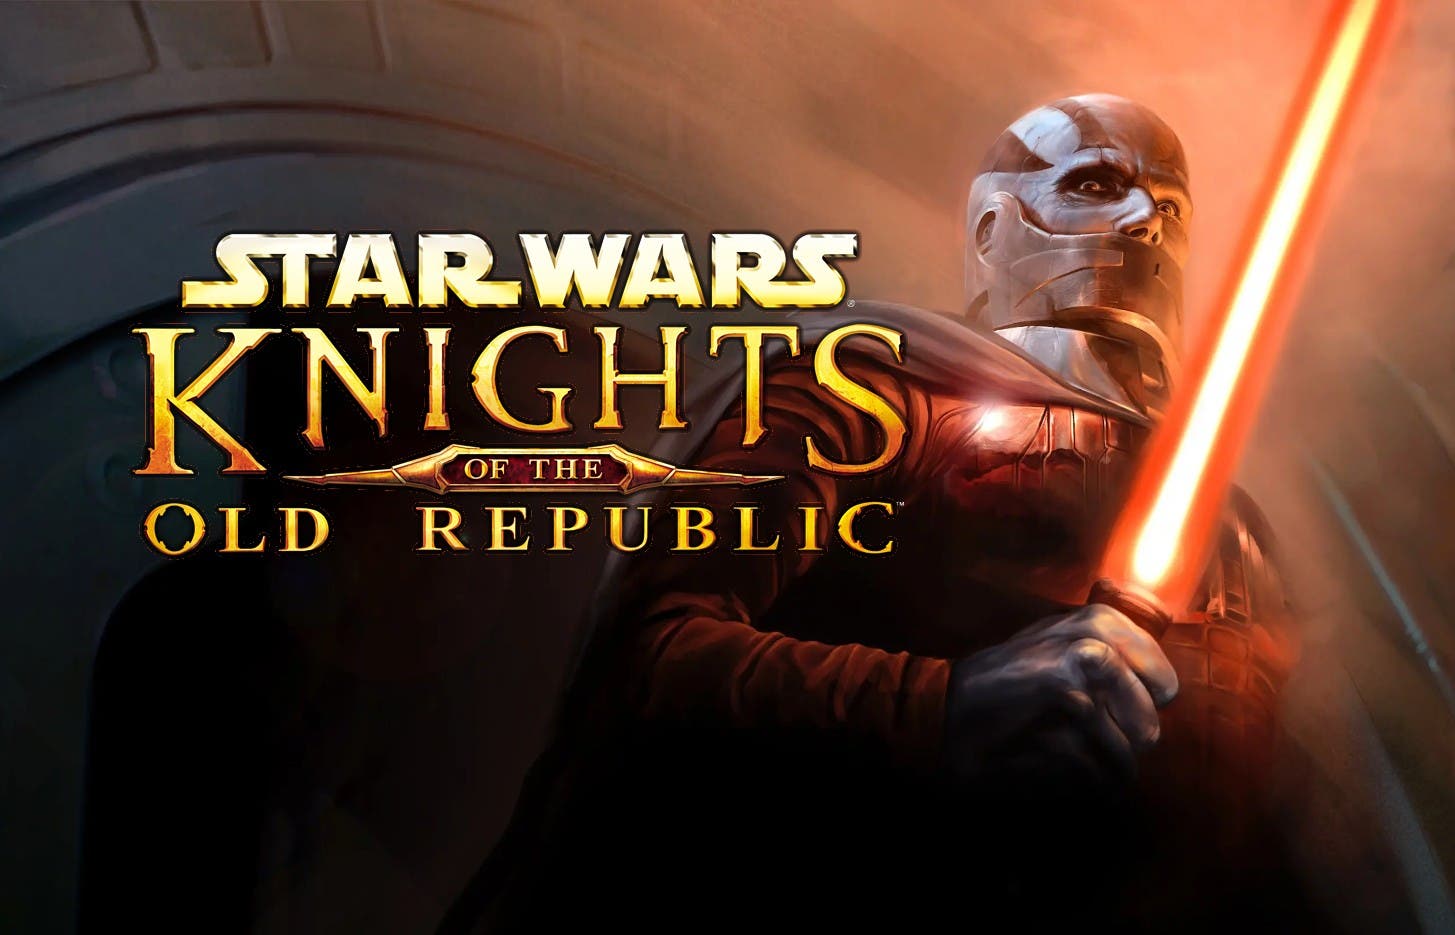 Star Wars kotor Nintendo Switch. Nintendo Switch Knights of the old Republic. Kotor 1 Switch. Star Wars: Knights of the old Republic игра обложка диска.